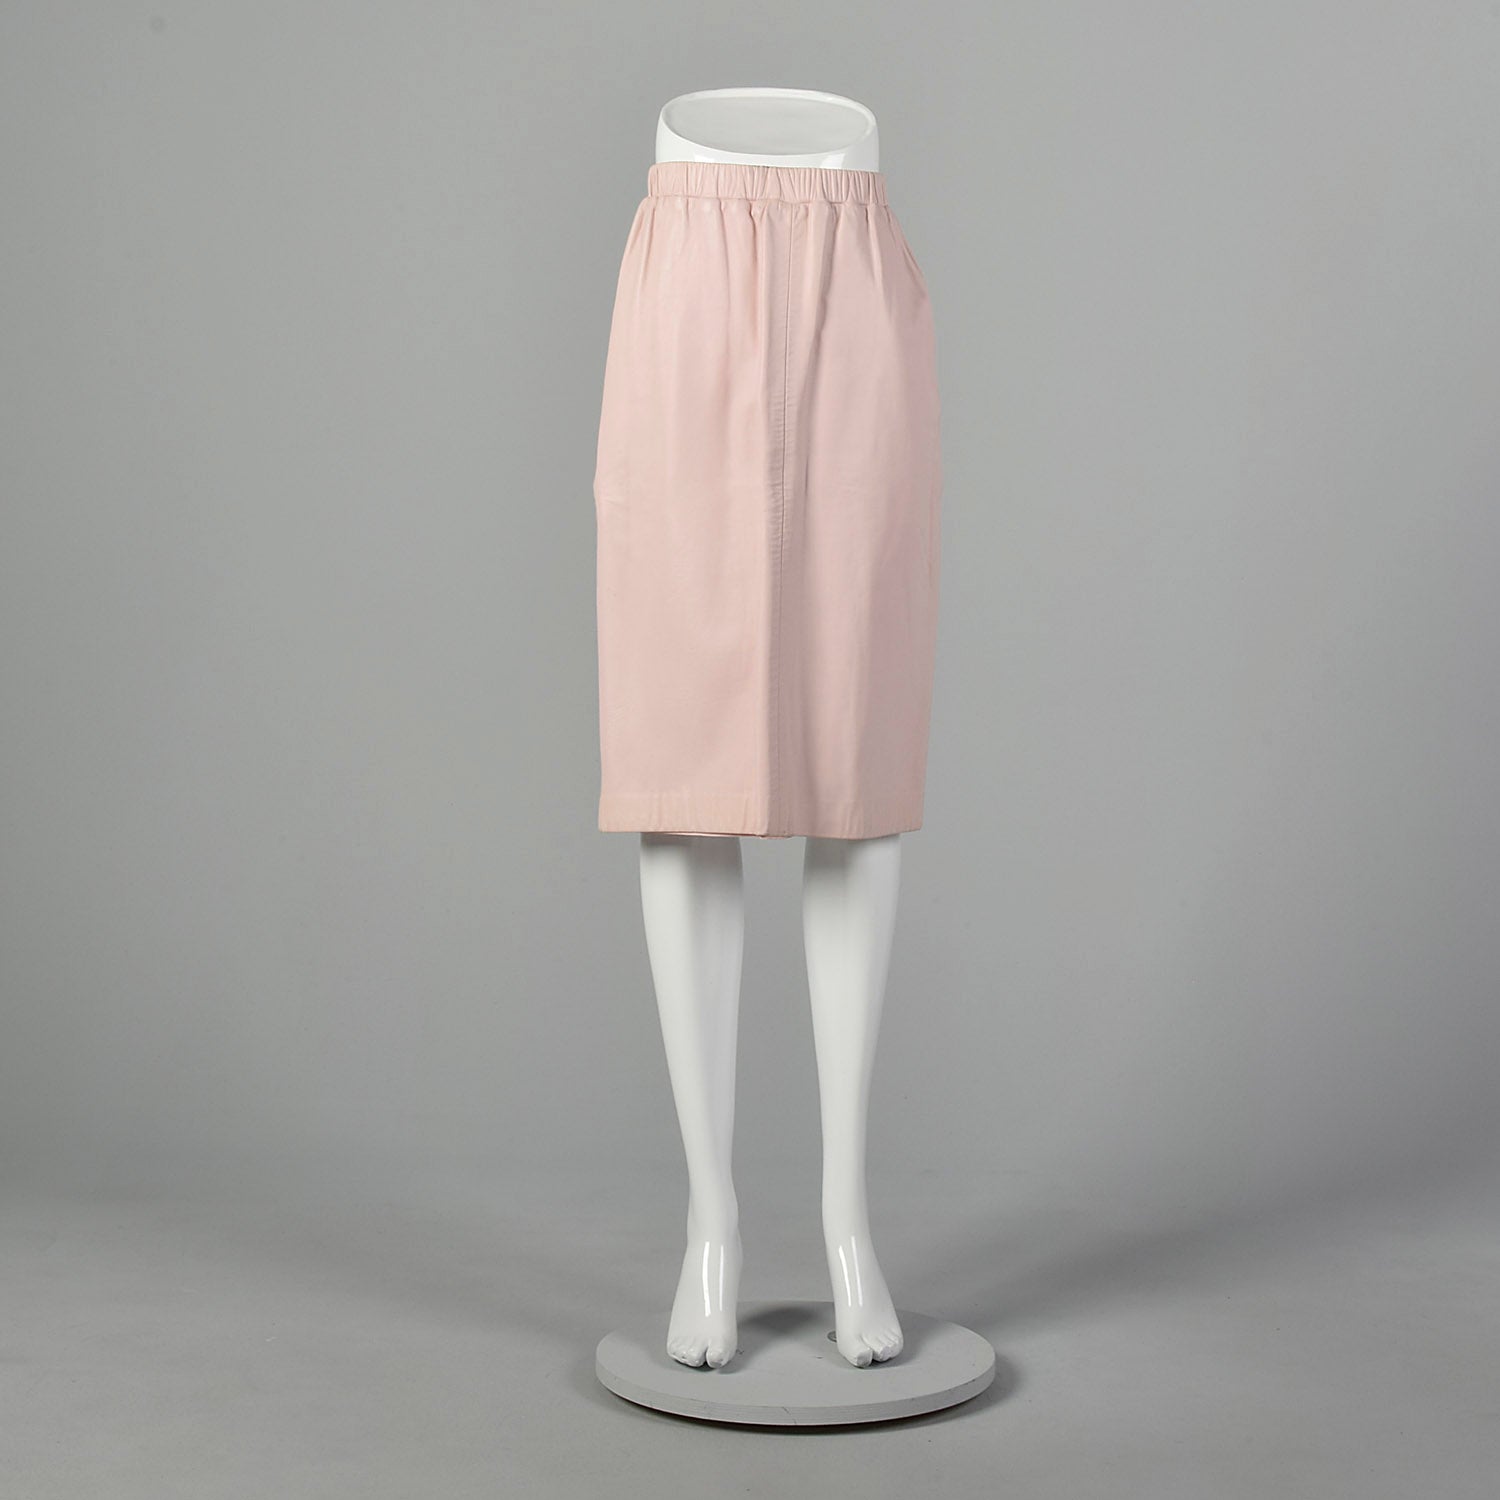 XS Pastel Pink Leather Skirt